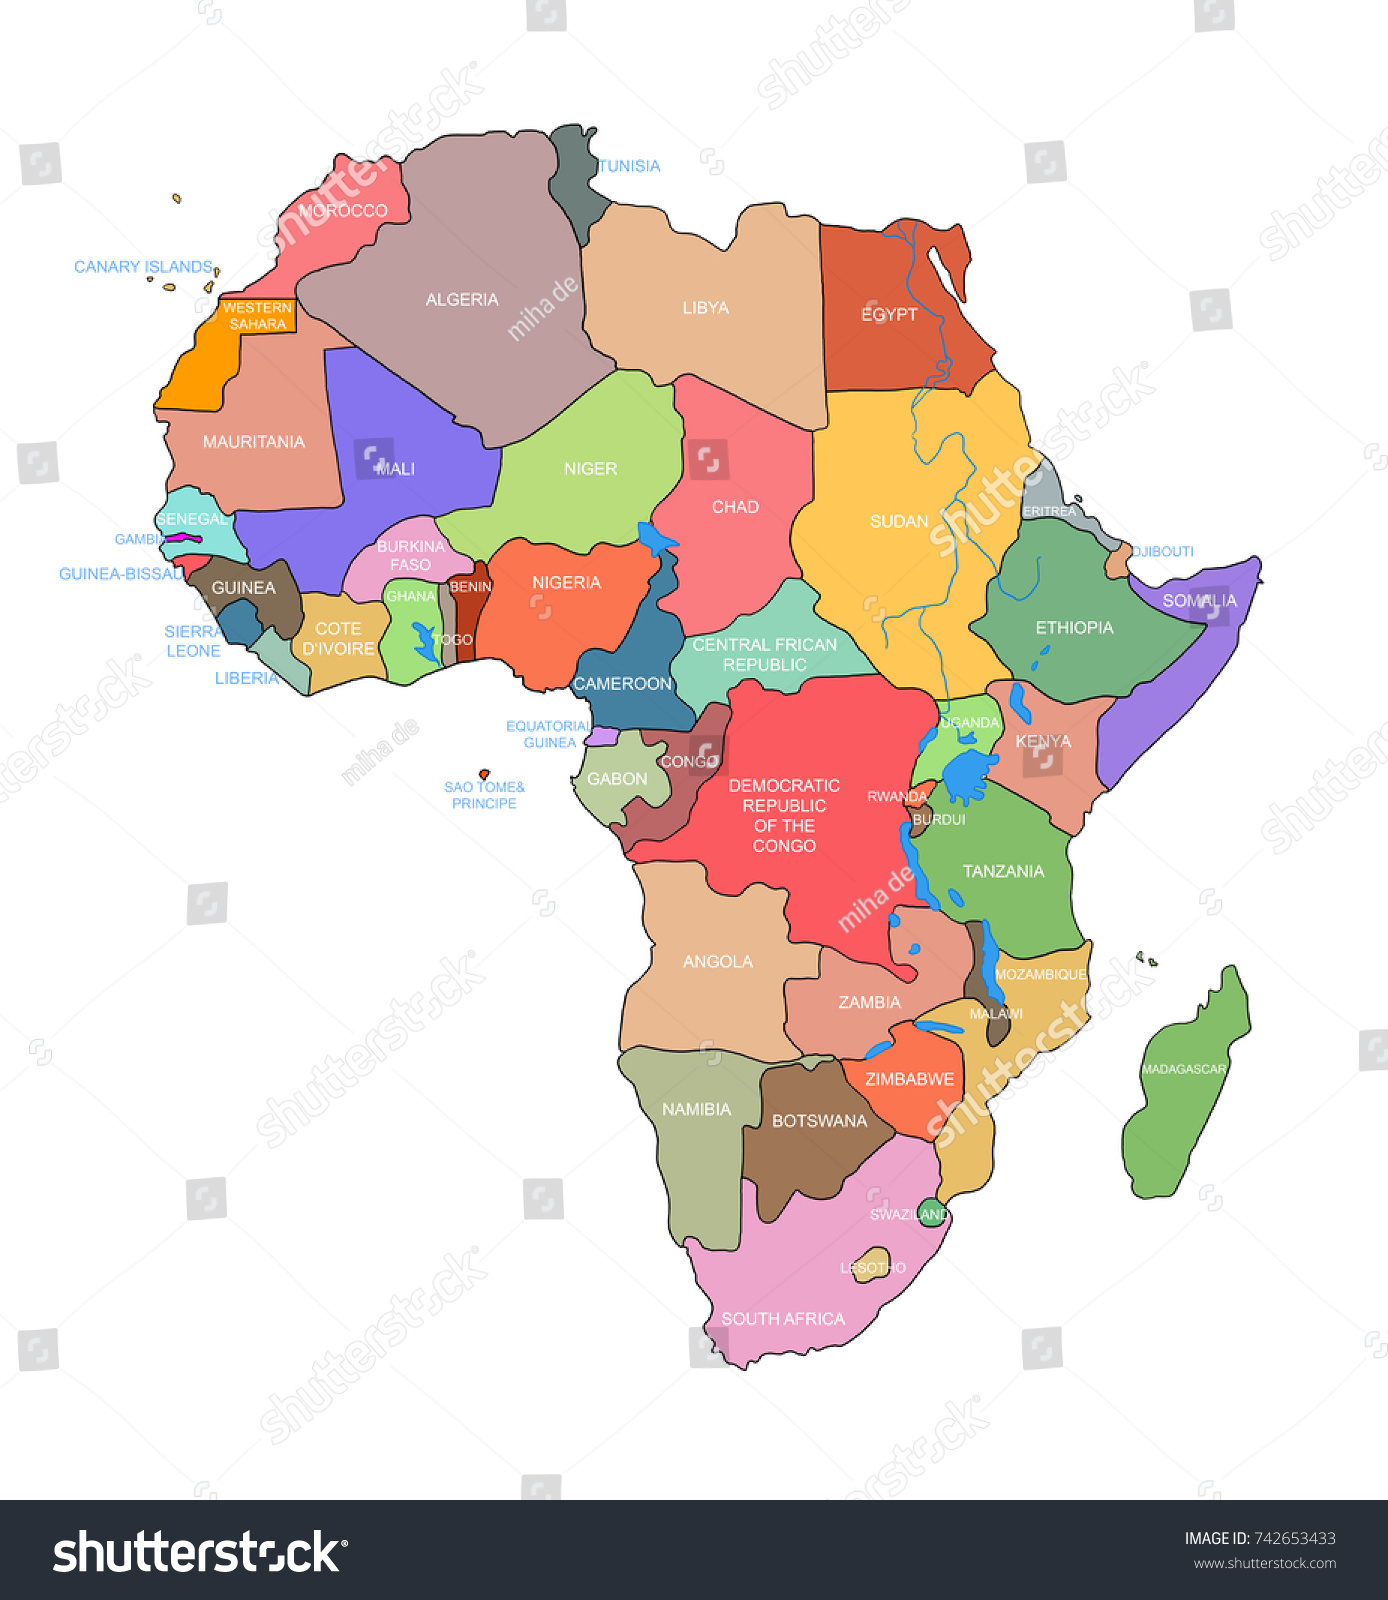 Country in africa